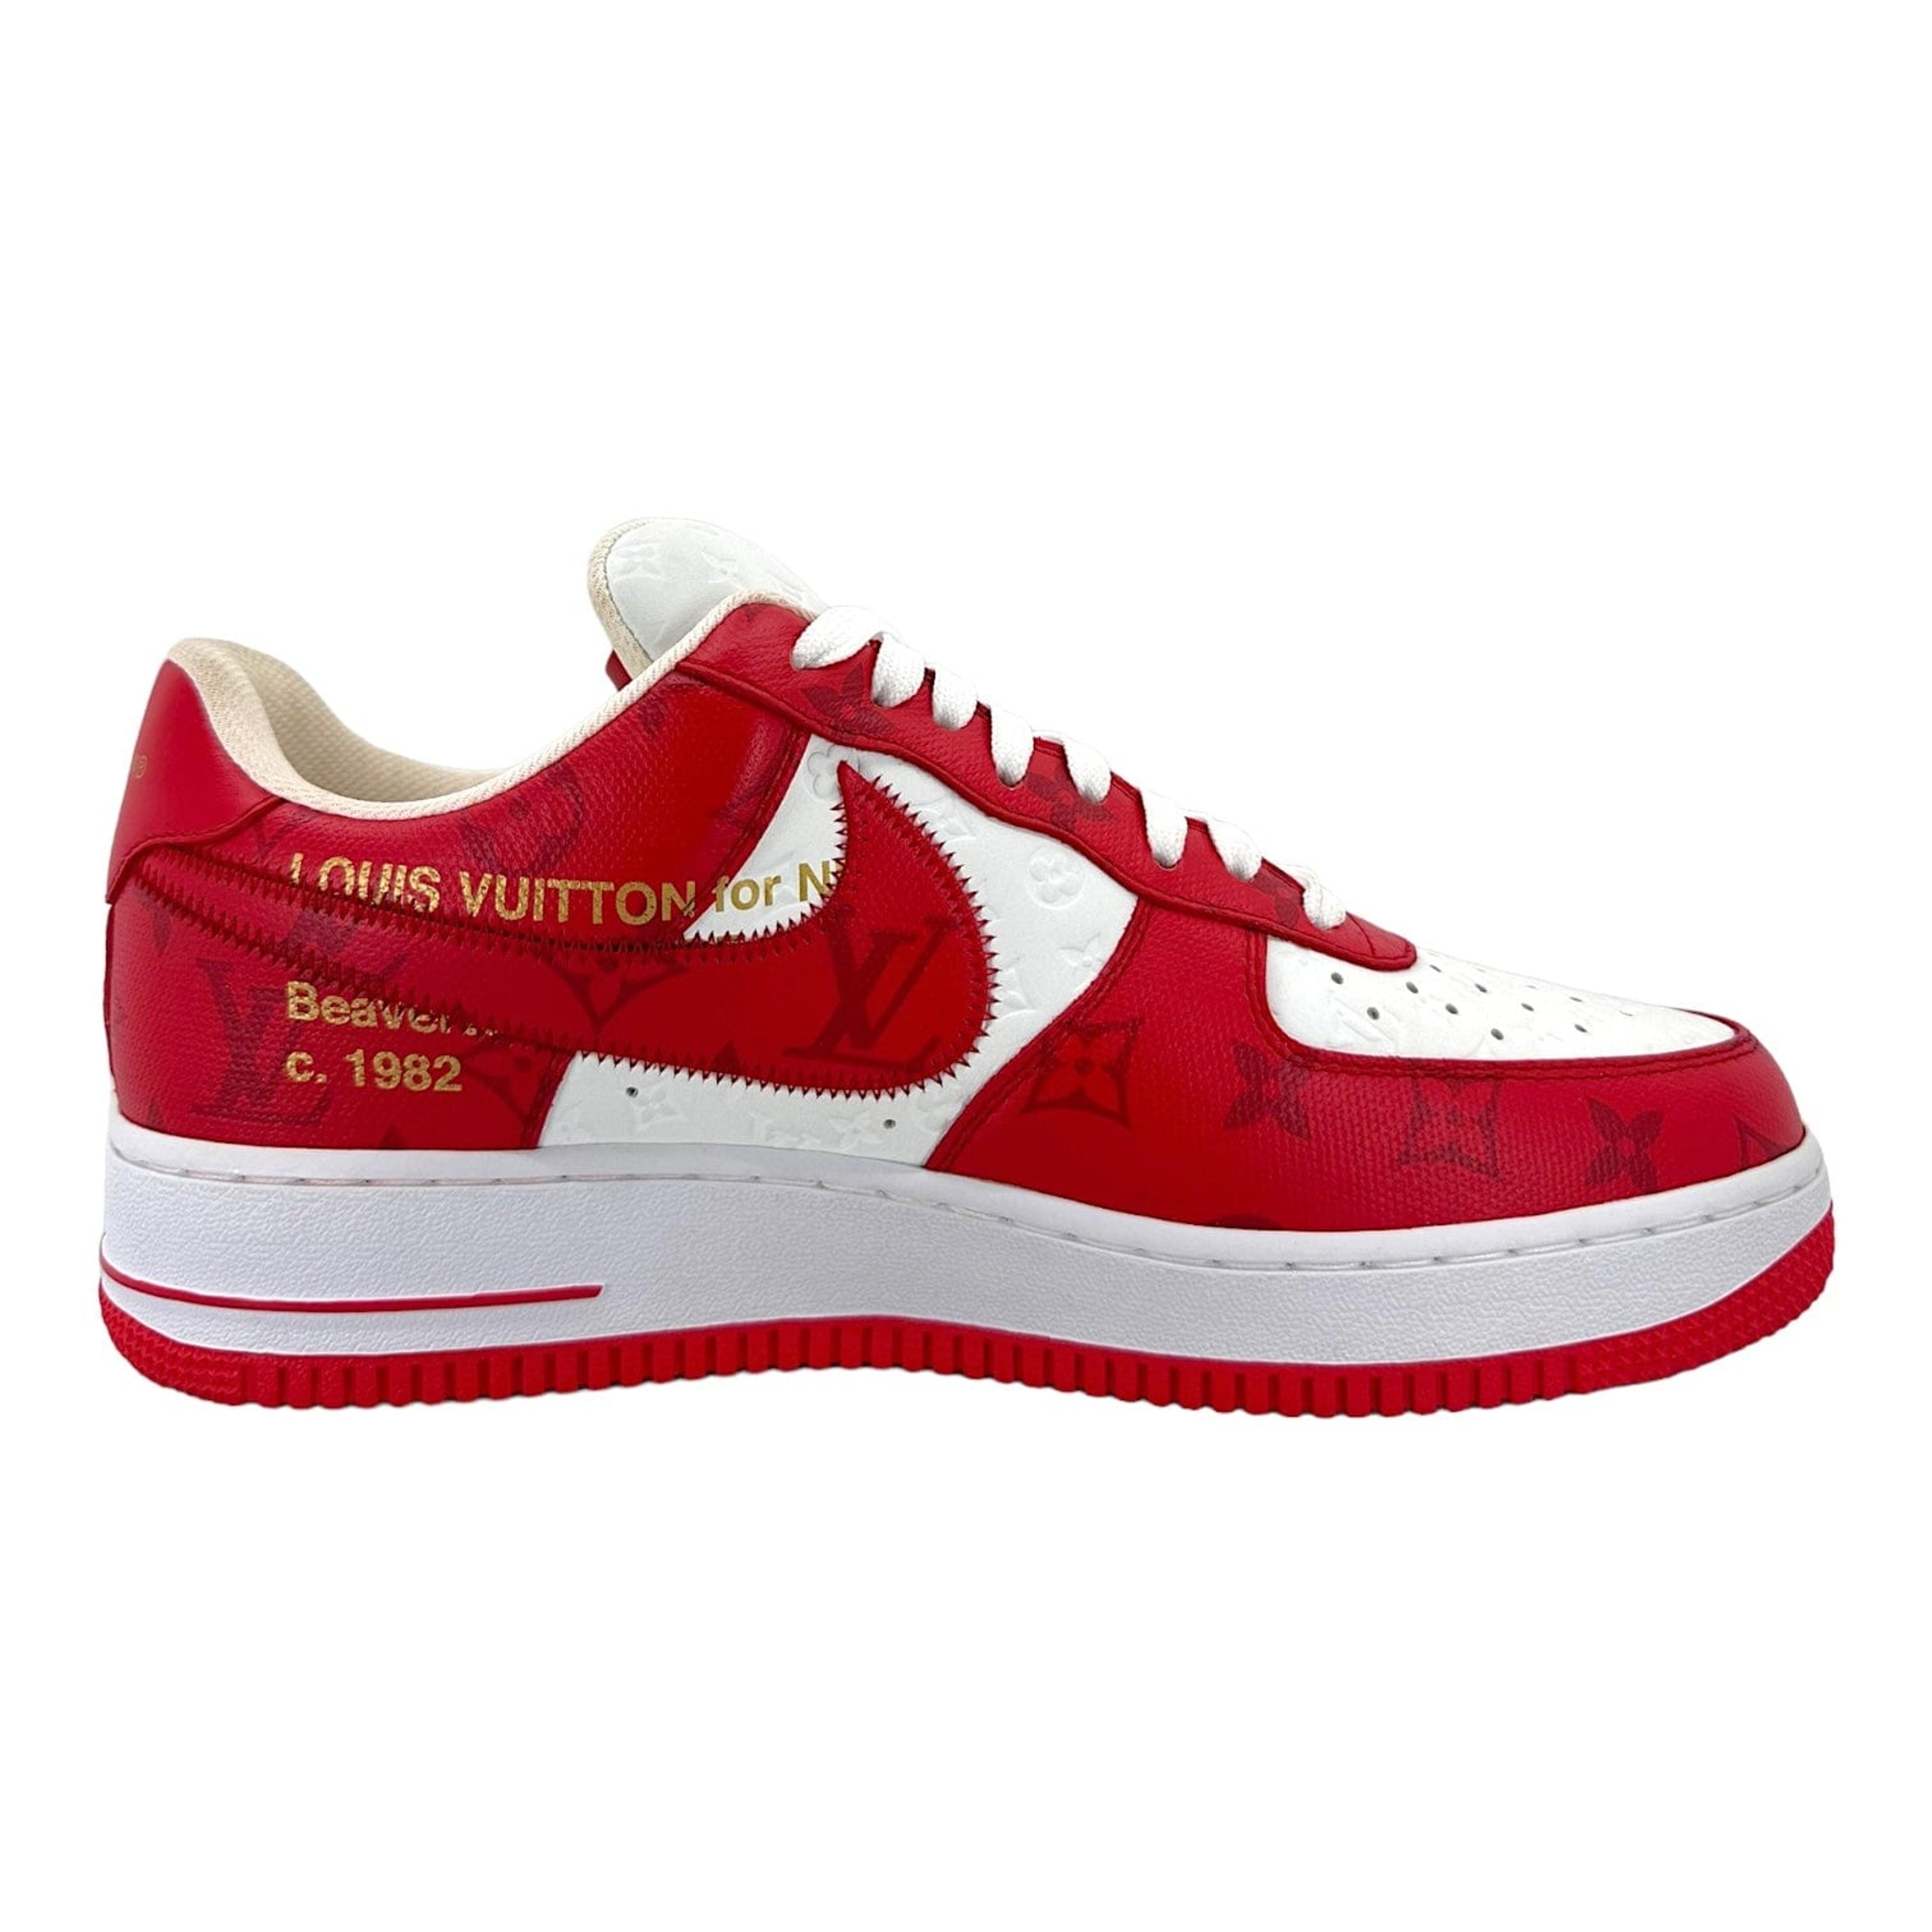 Alternate View 3 of Louis Vuitton x Nike Air Force 1 Low By Virgil Abloh White Red